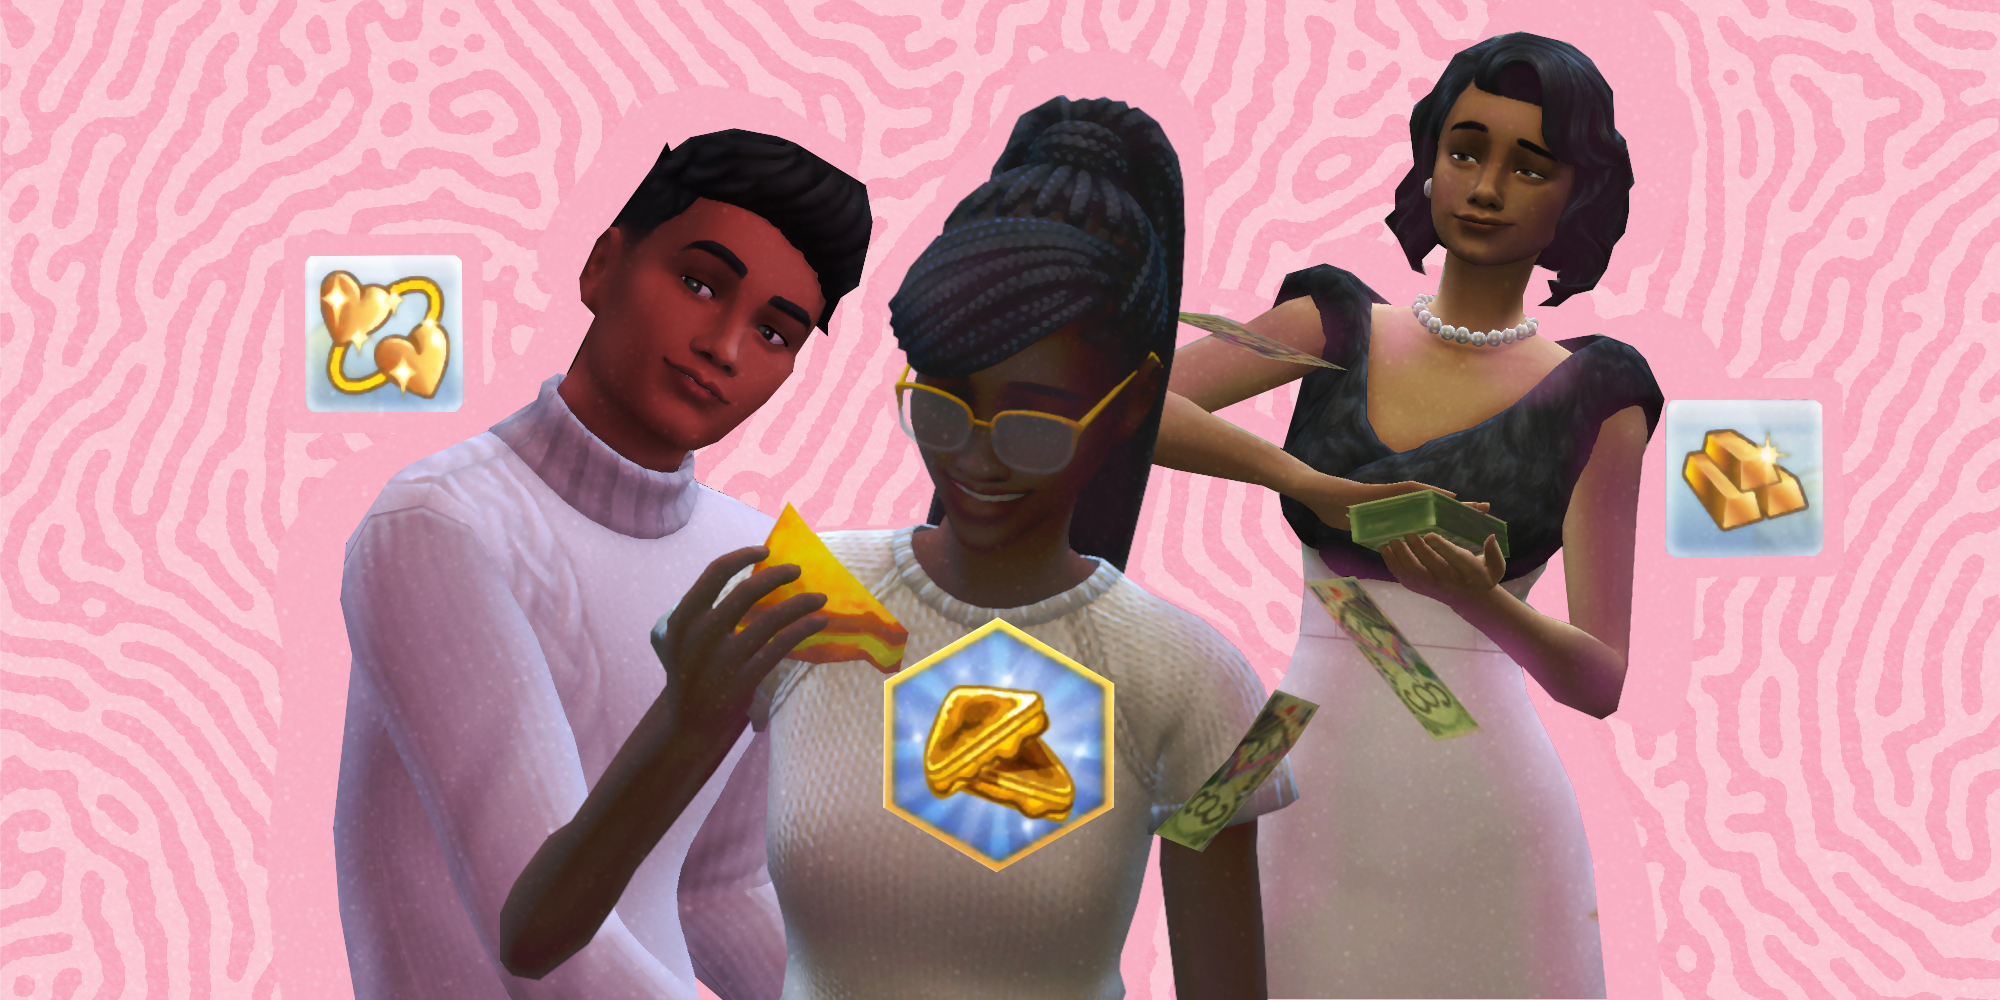 Three Sims from The Sims 4 in front of a pink background. One looks to the left, one eats grilled cheese, and a third is throwing Simoleons. Aspiration icons float around them